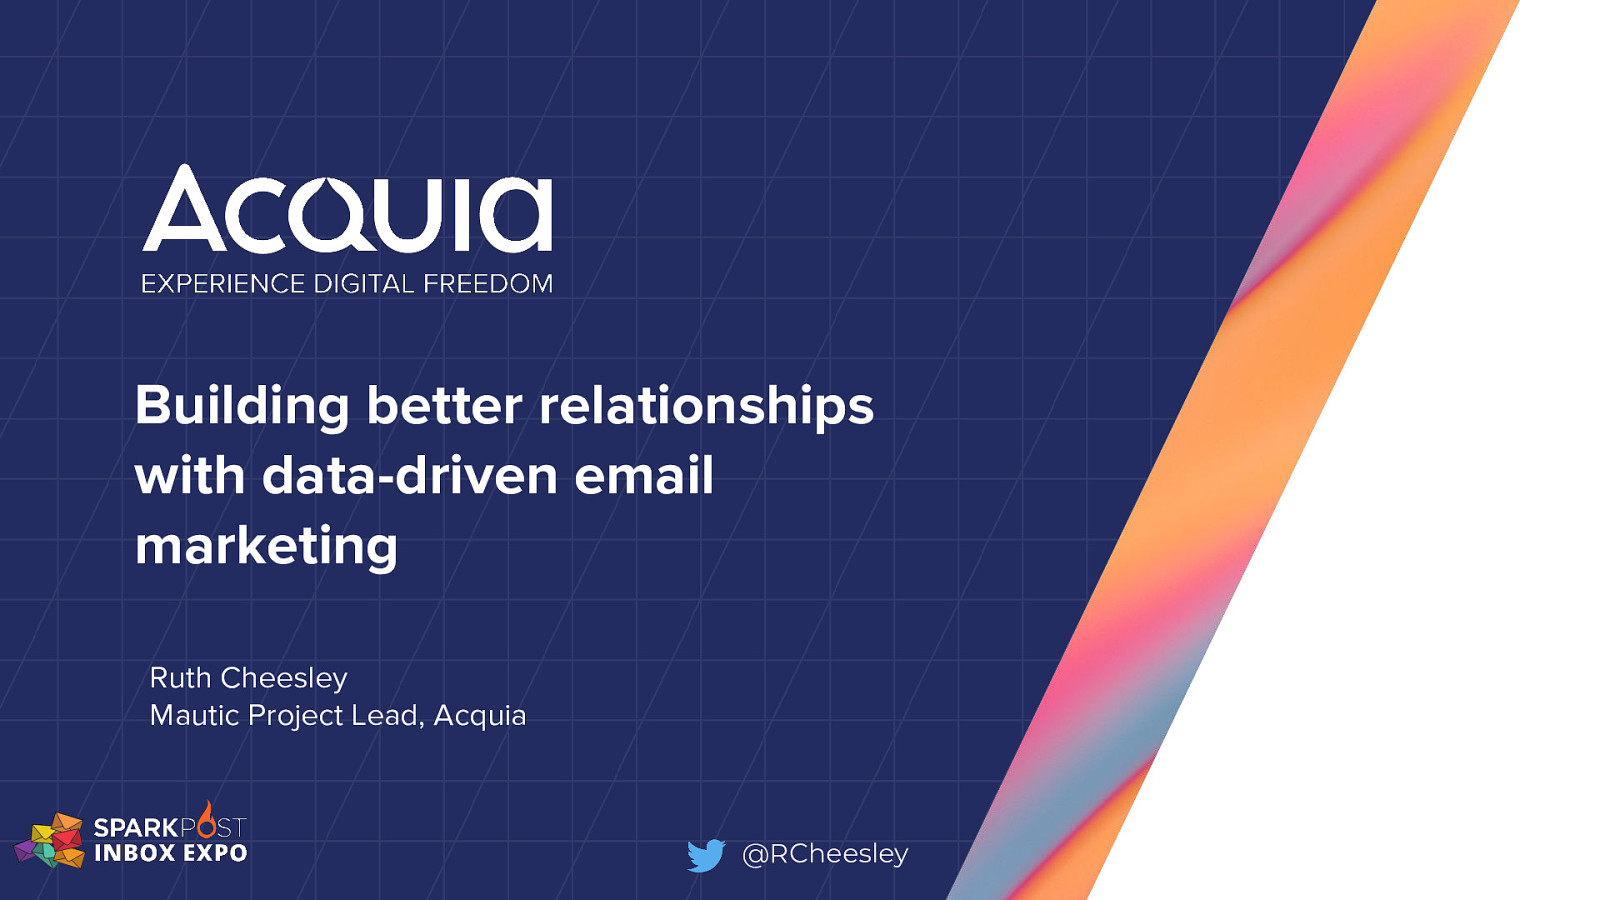 Building better relationships with data-driven email marketing